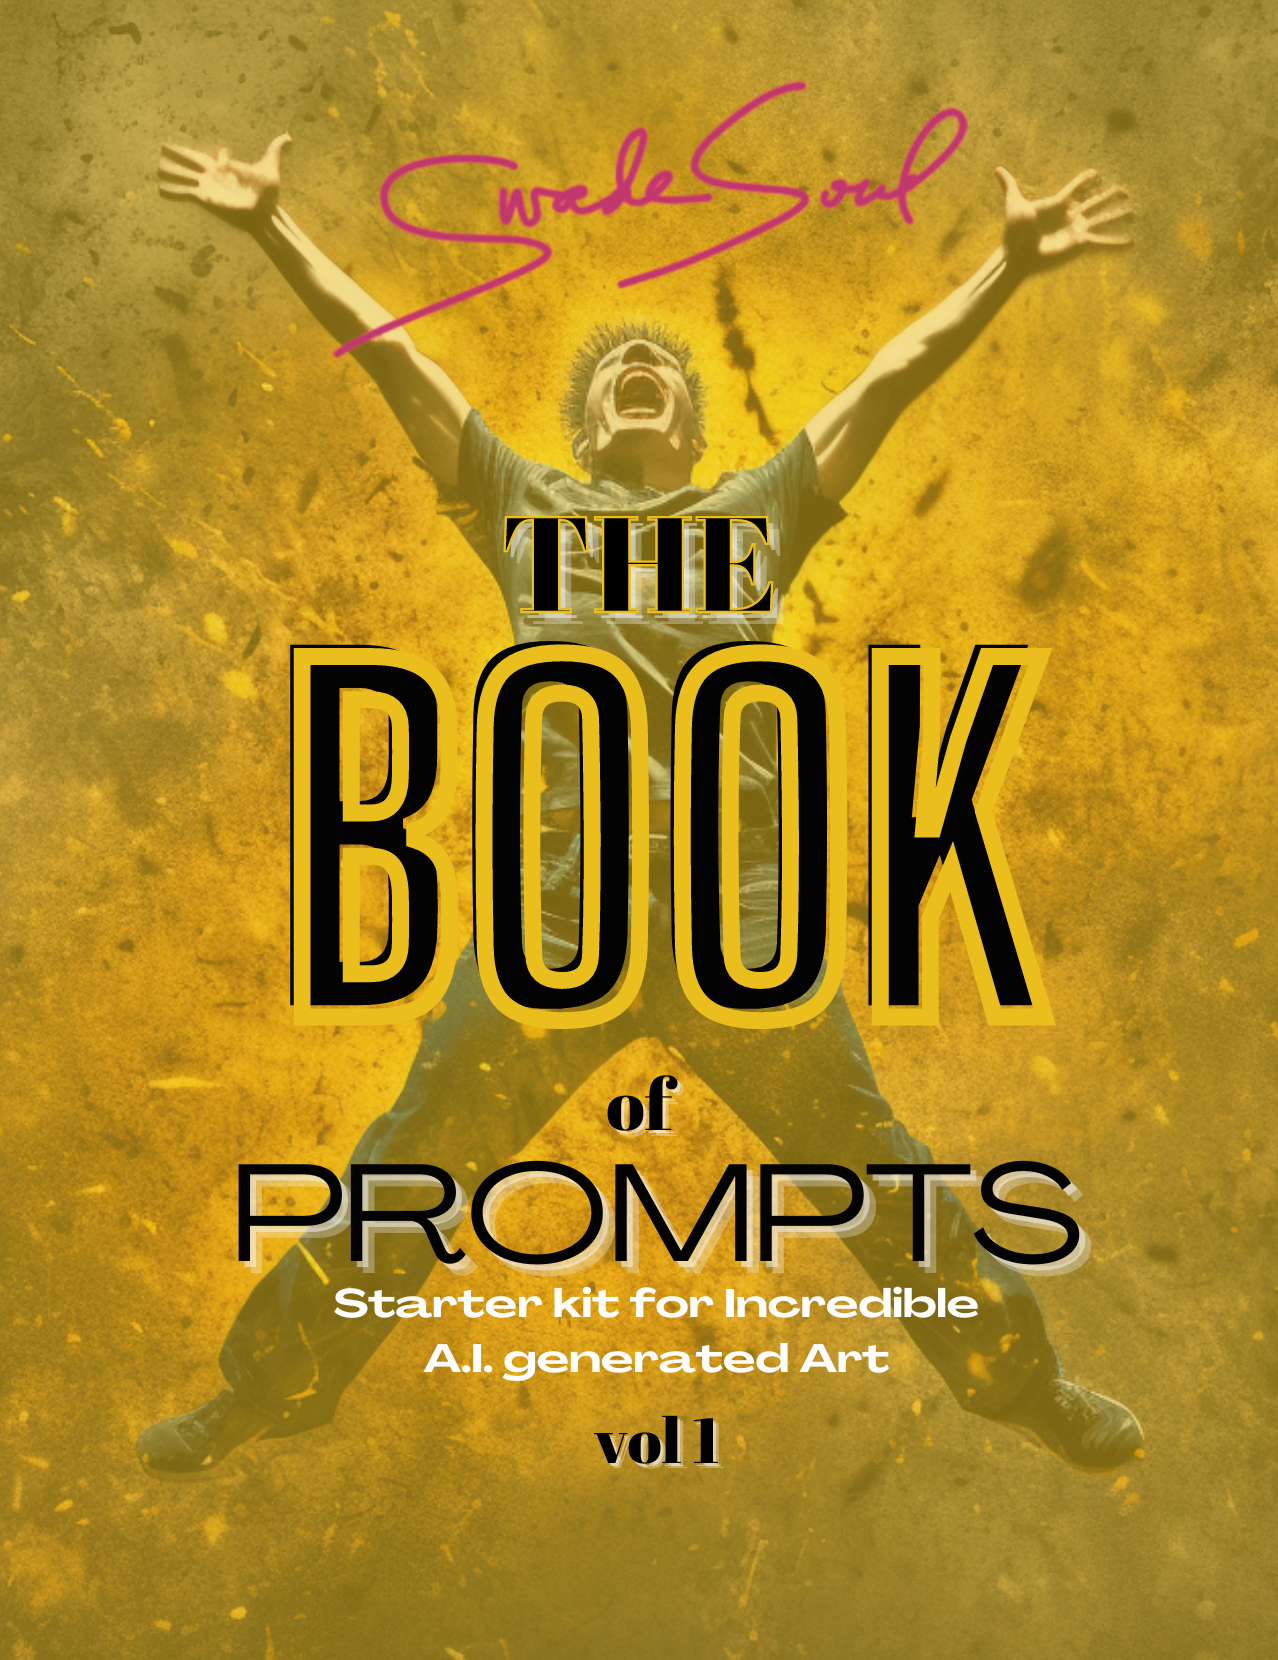 the book of prompts is a starter kit for incredible ai generated art